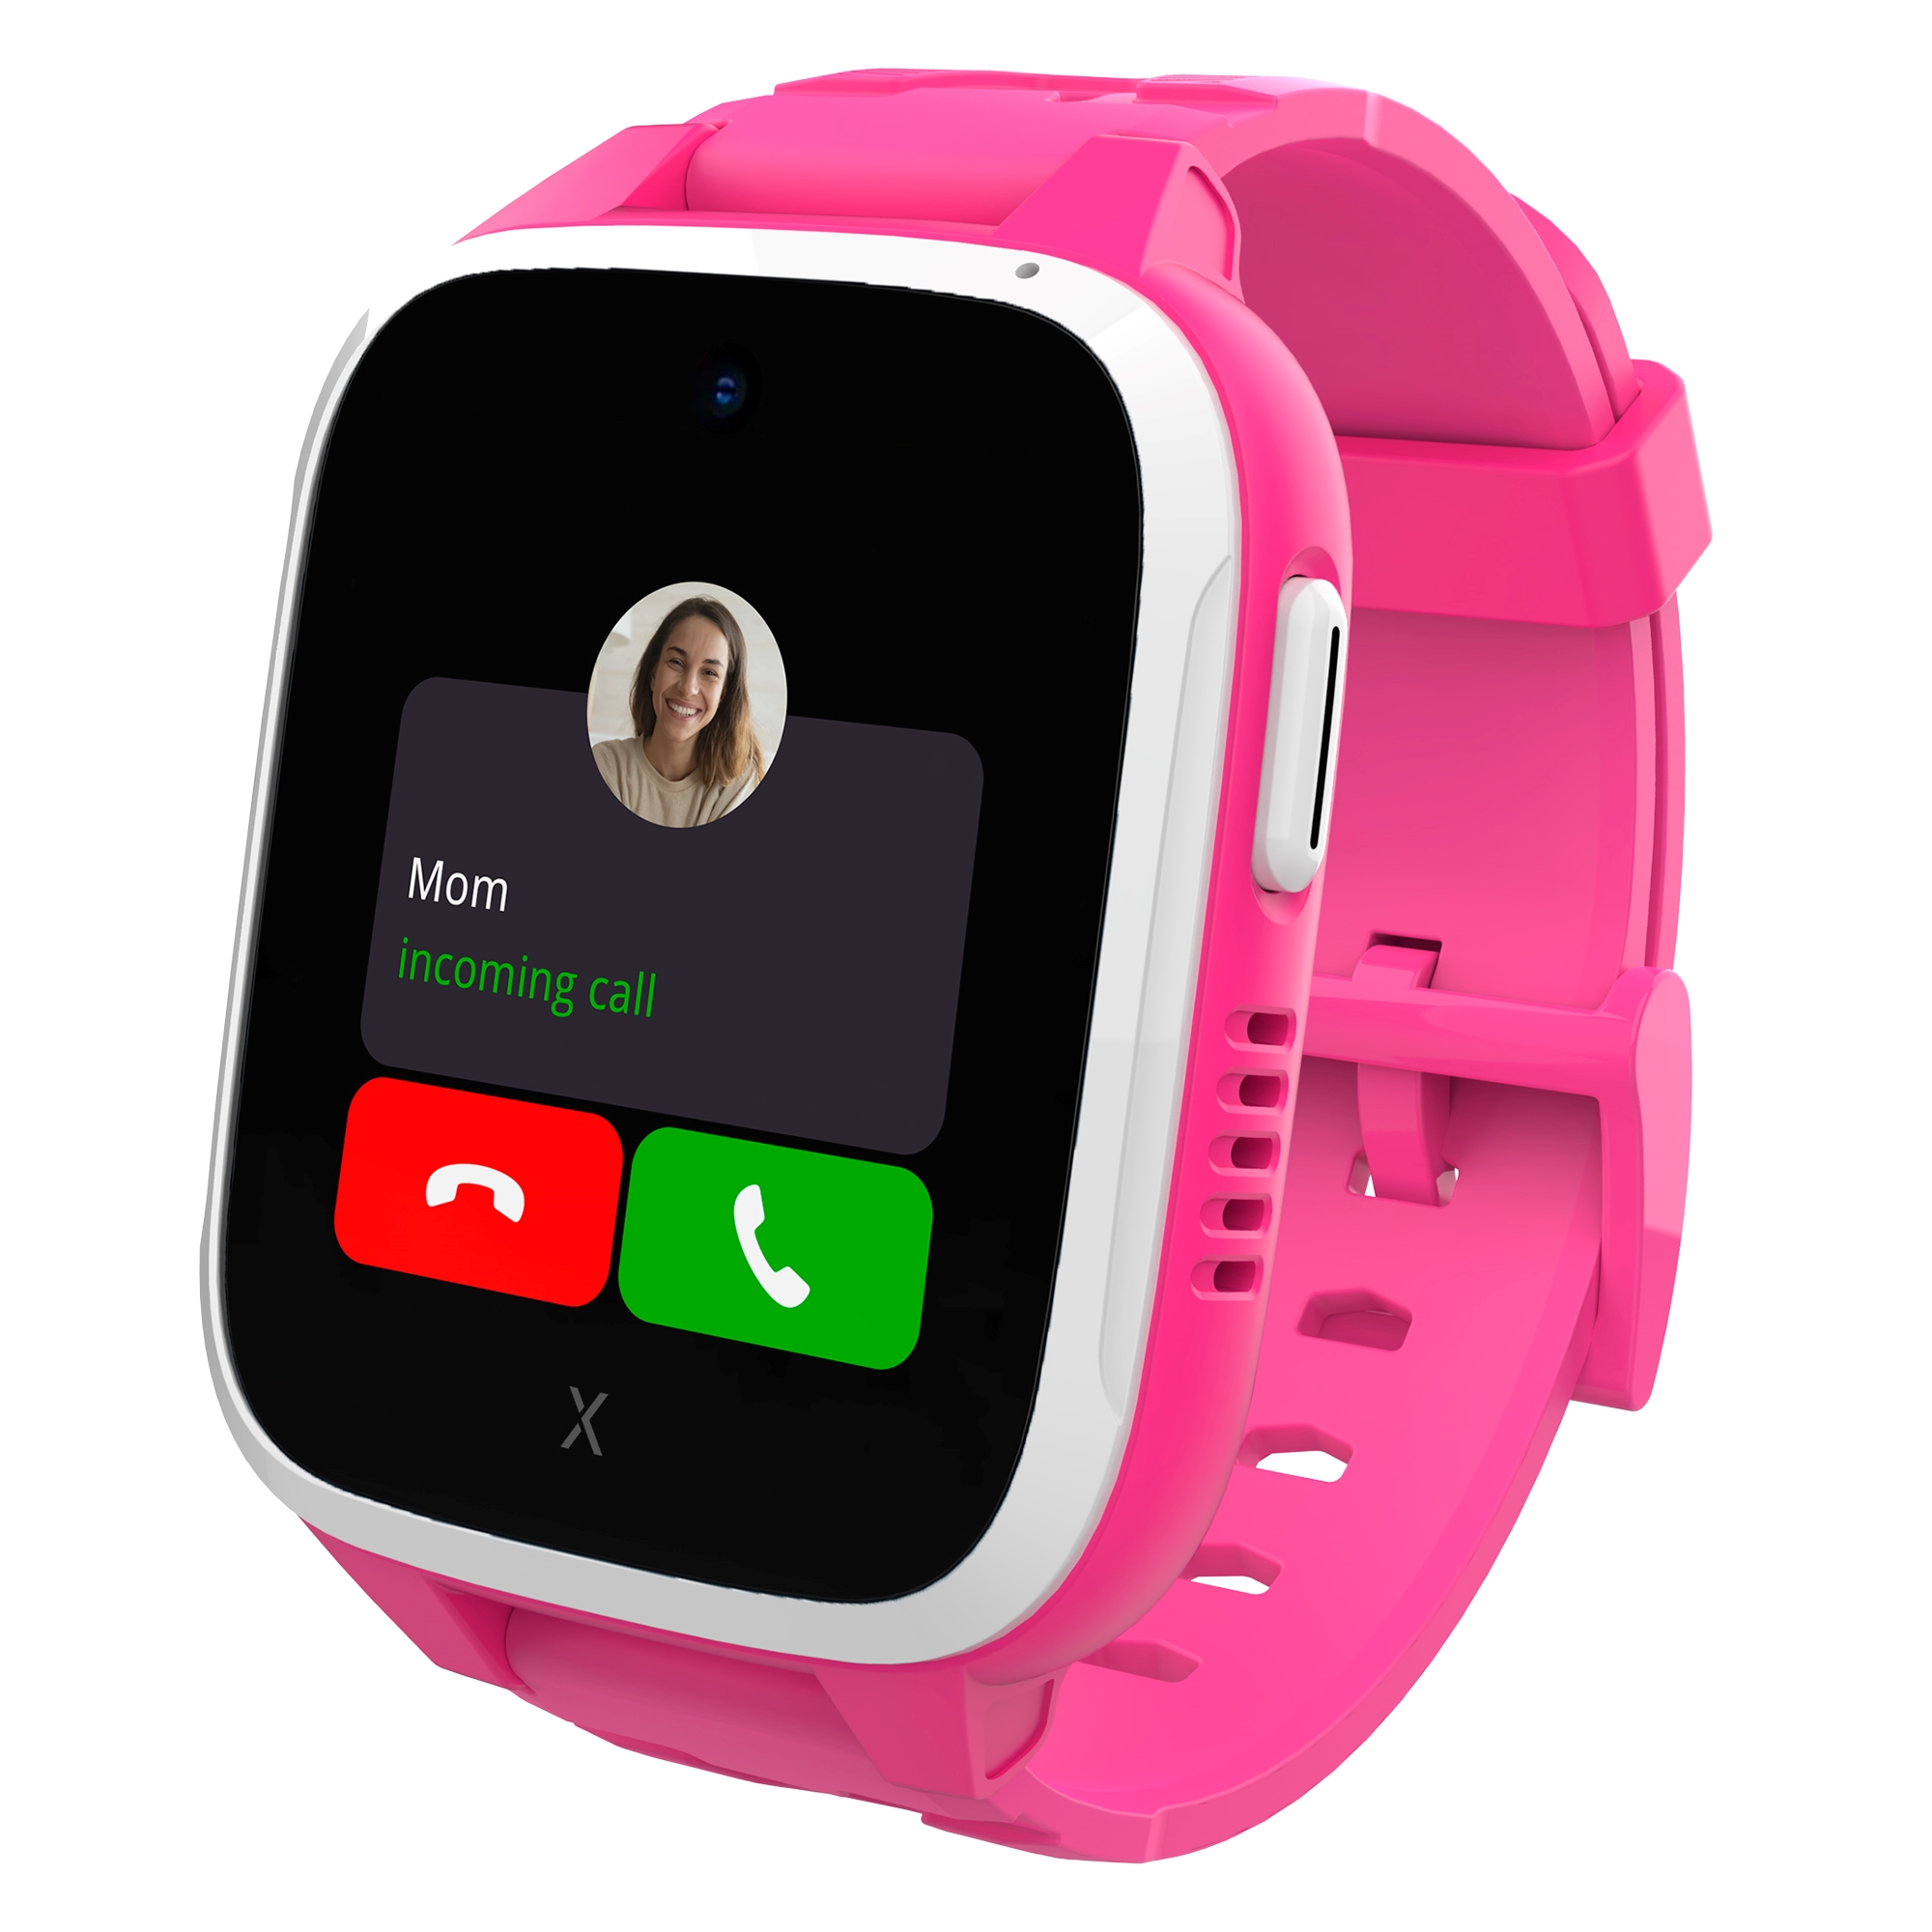 XGO3 Kids' Smartwatch Cell Phone with GPS